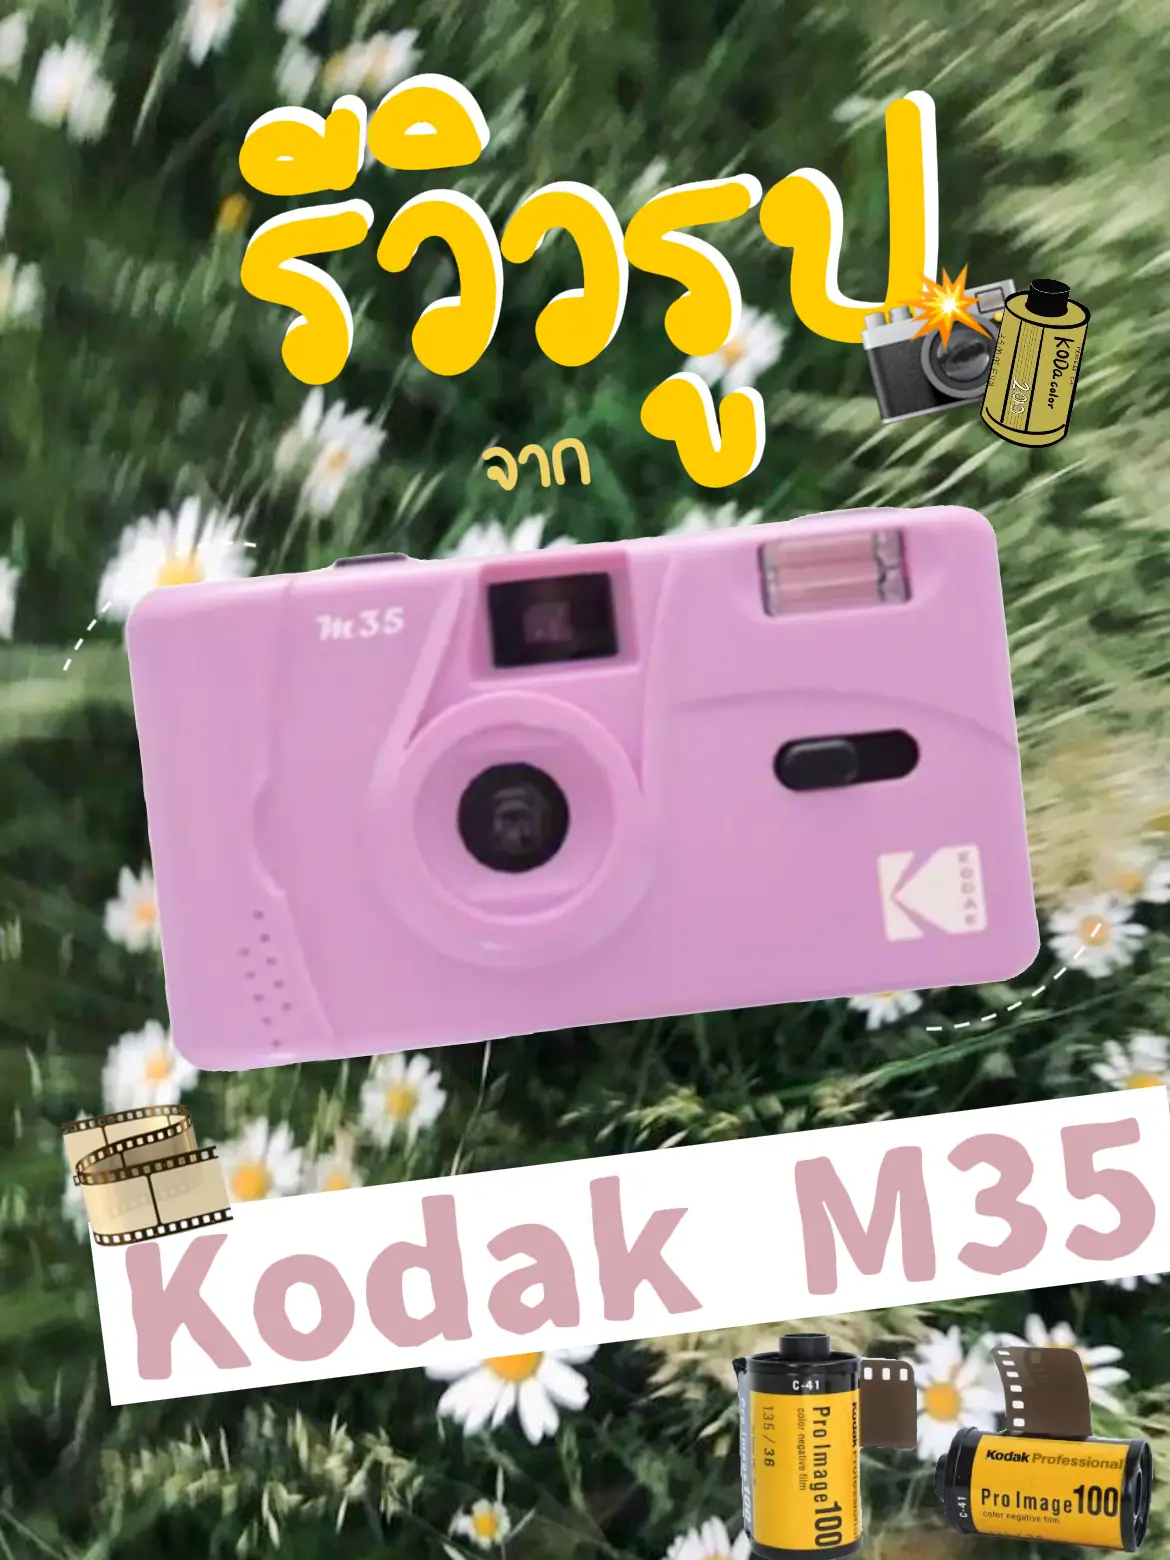 Review of photos obtained from the Kodak M35 film camera📸🎞, Gallery  posted by beebee_cd